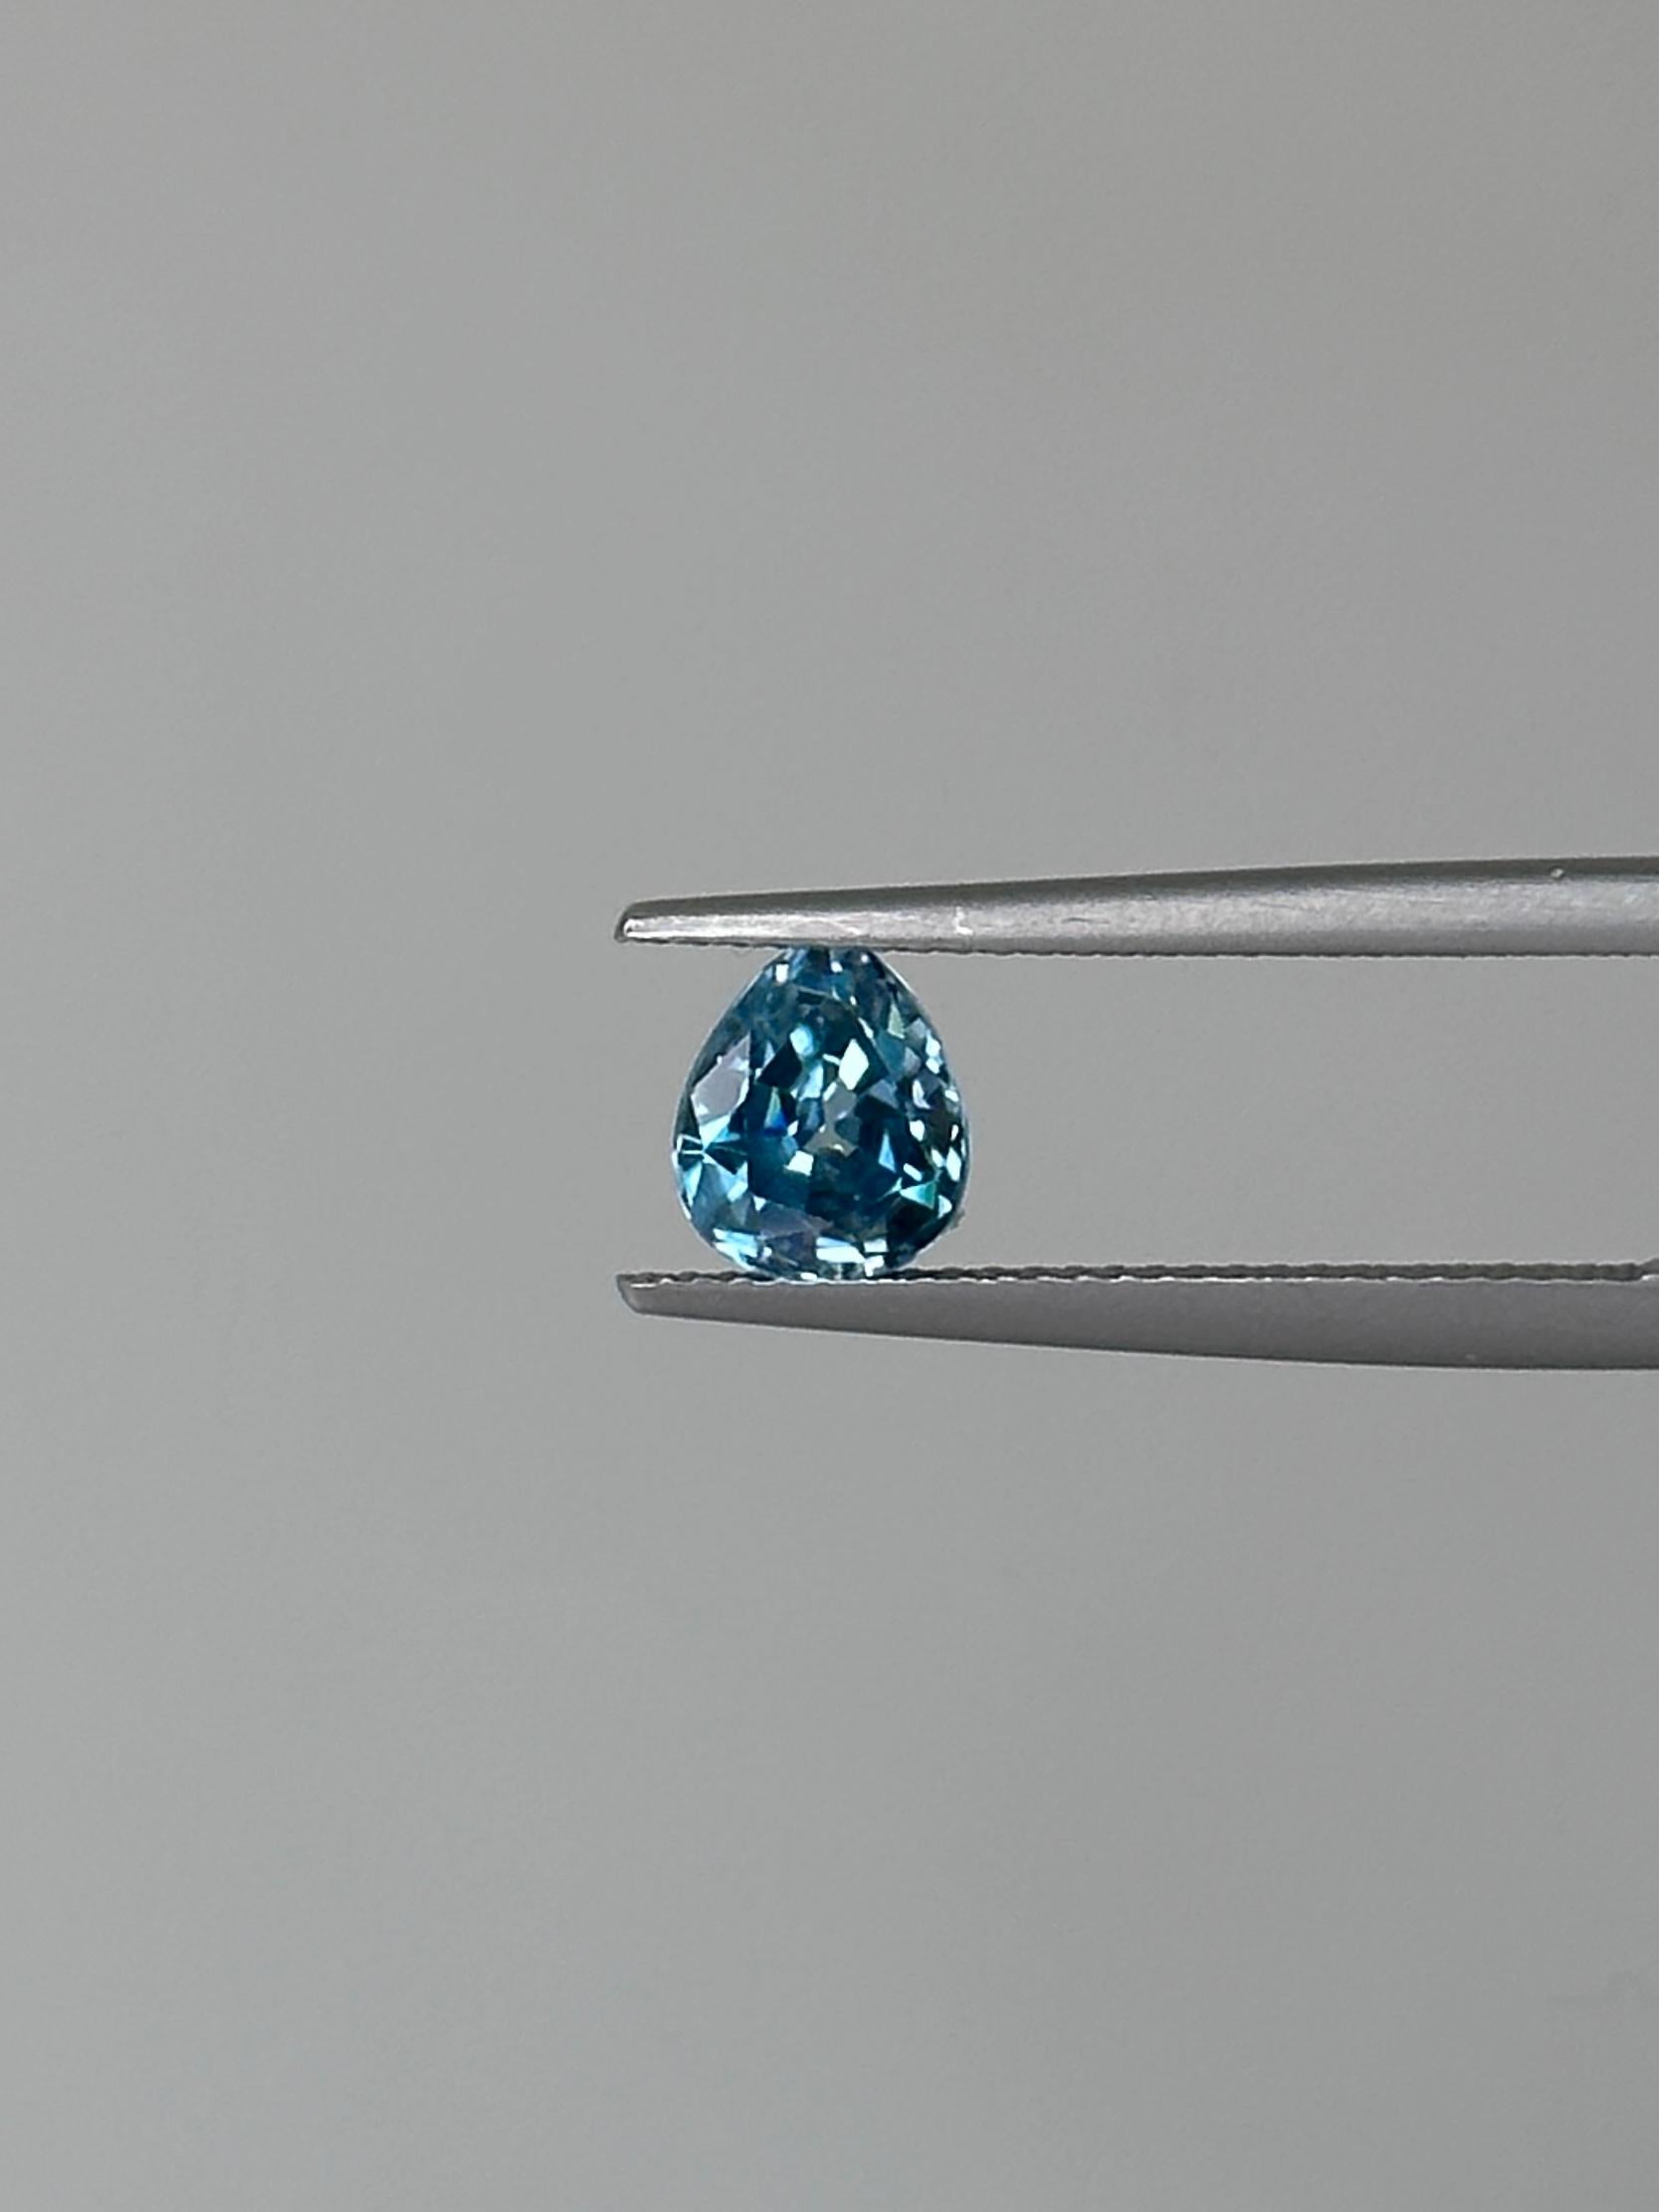 A beautiful sparkling Pear shaped 'Metallic Blue' Zircon from Ratanakiri, Cambodia.

This 1.55 carat Blue Zircon has a soothing grayish tinge but a pure light blue color. Giving it the 